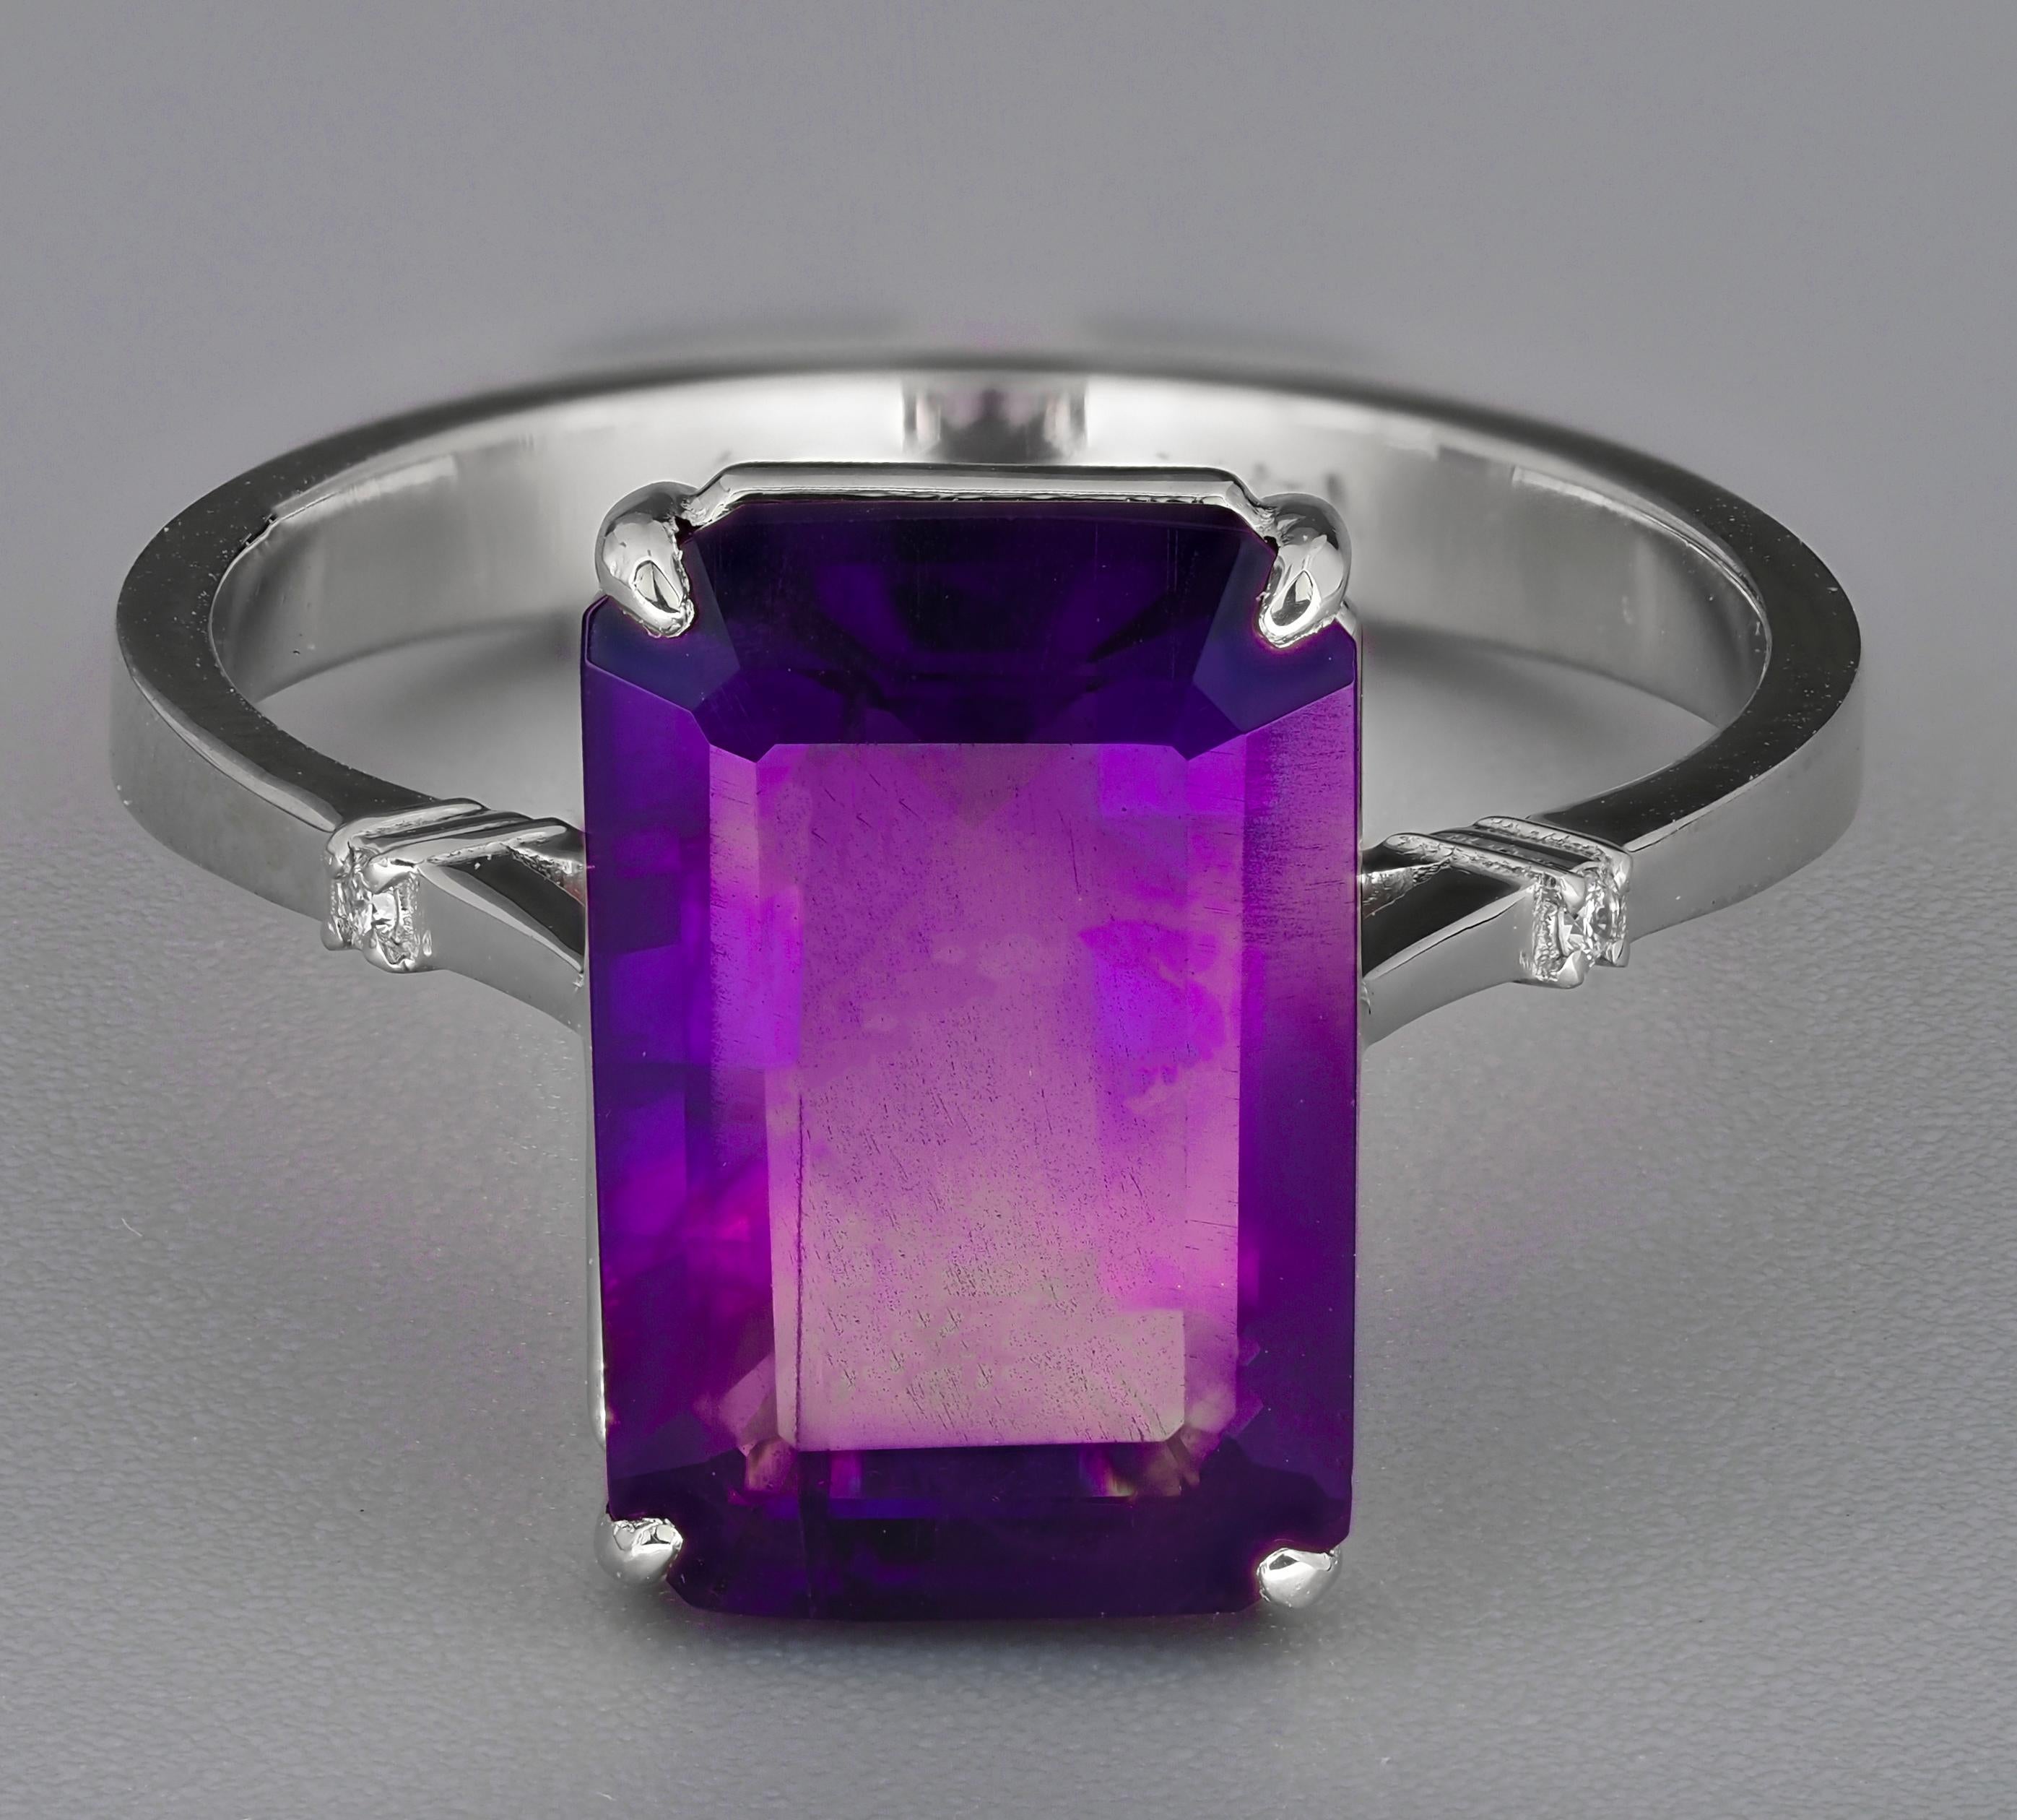 Octagon amethyst 14k gold ring. 

Solitaire amethyst ring. Amethyst gold ring. February birthstone ring. Minimalist ring. 

Metal: 14k gold
Weight: 2.9 g. depends from size
 
Set with amethyst, color - violet
Emerald cut, aprox 3 ct. in total